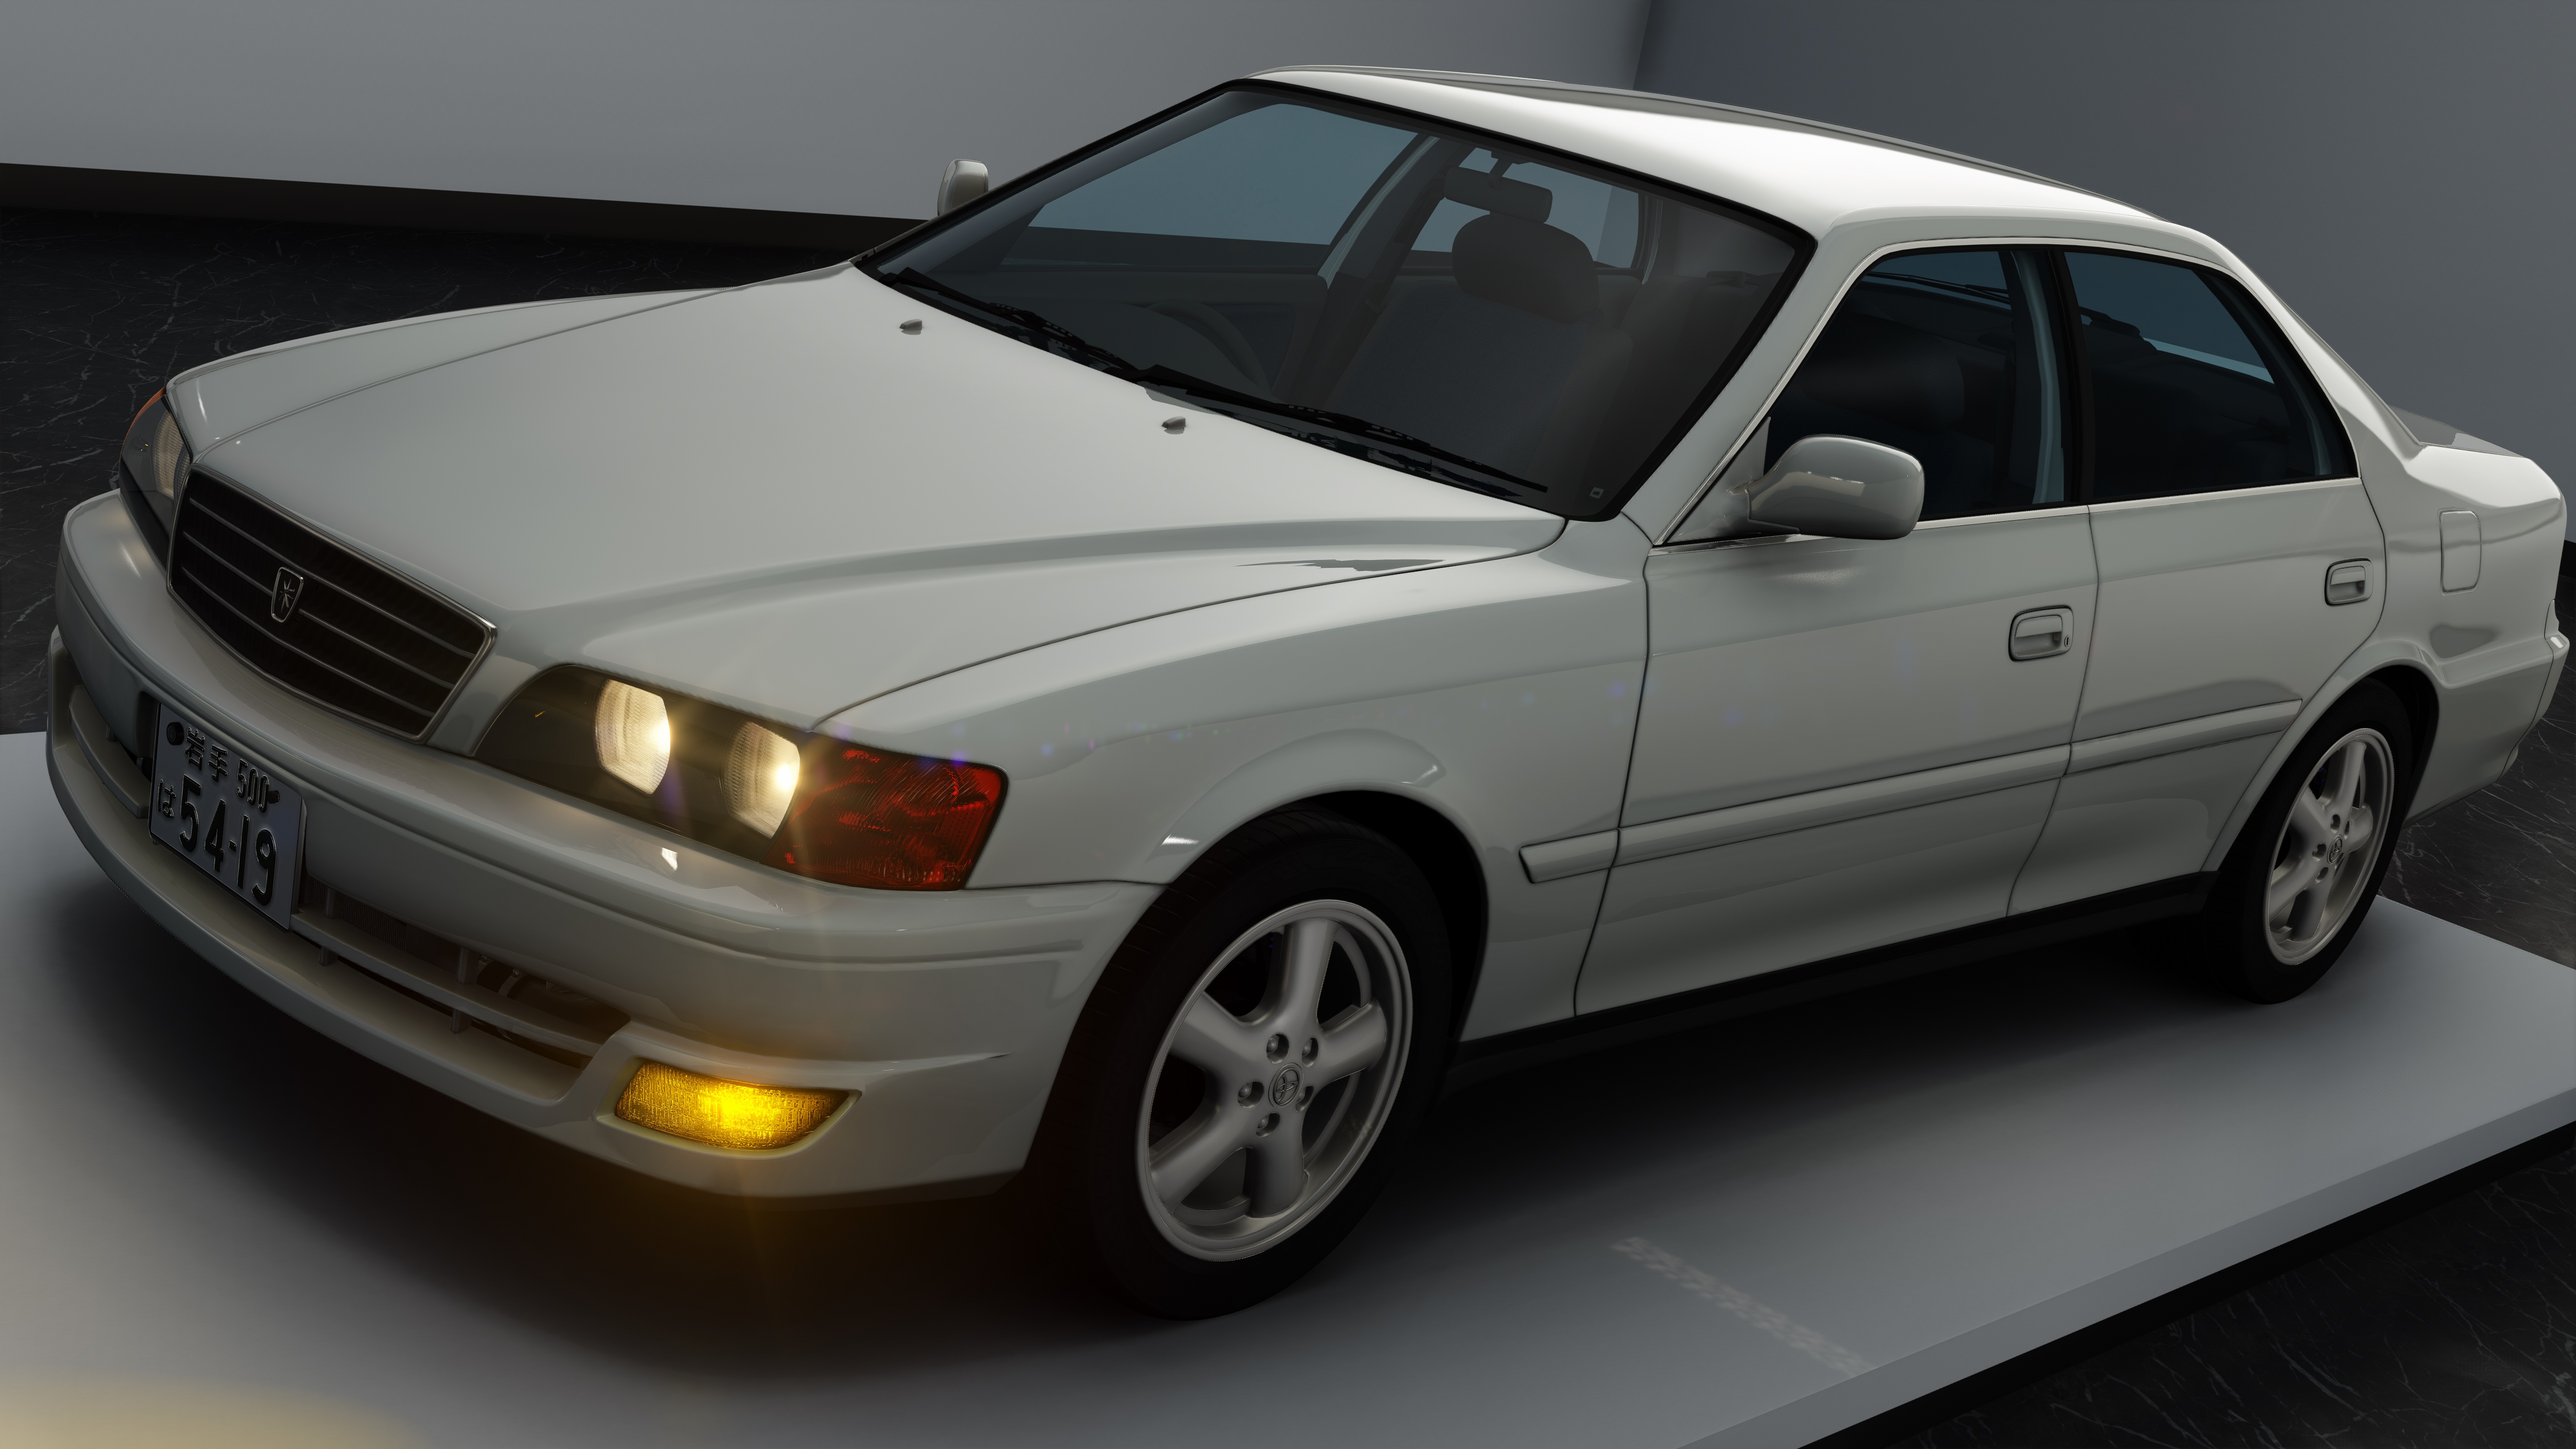 Toyota Chaser JZX100 Tourer V Stock Preview Image